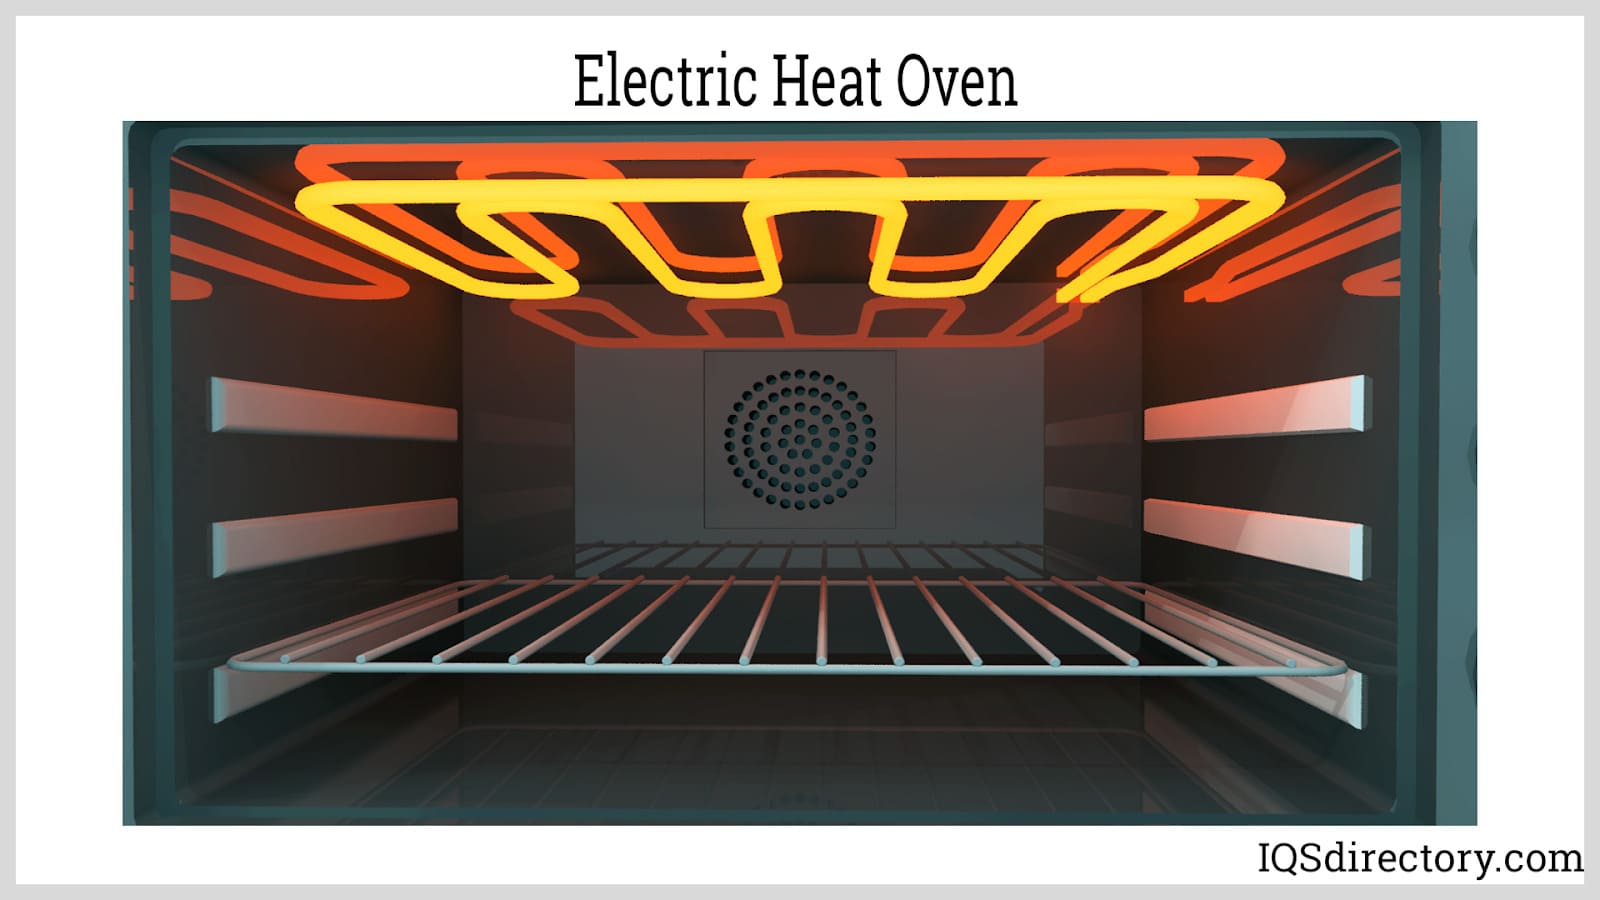 Electric Heat Oven